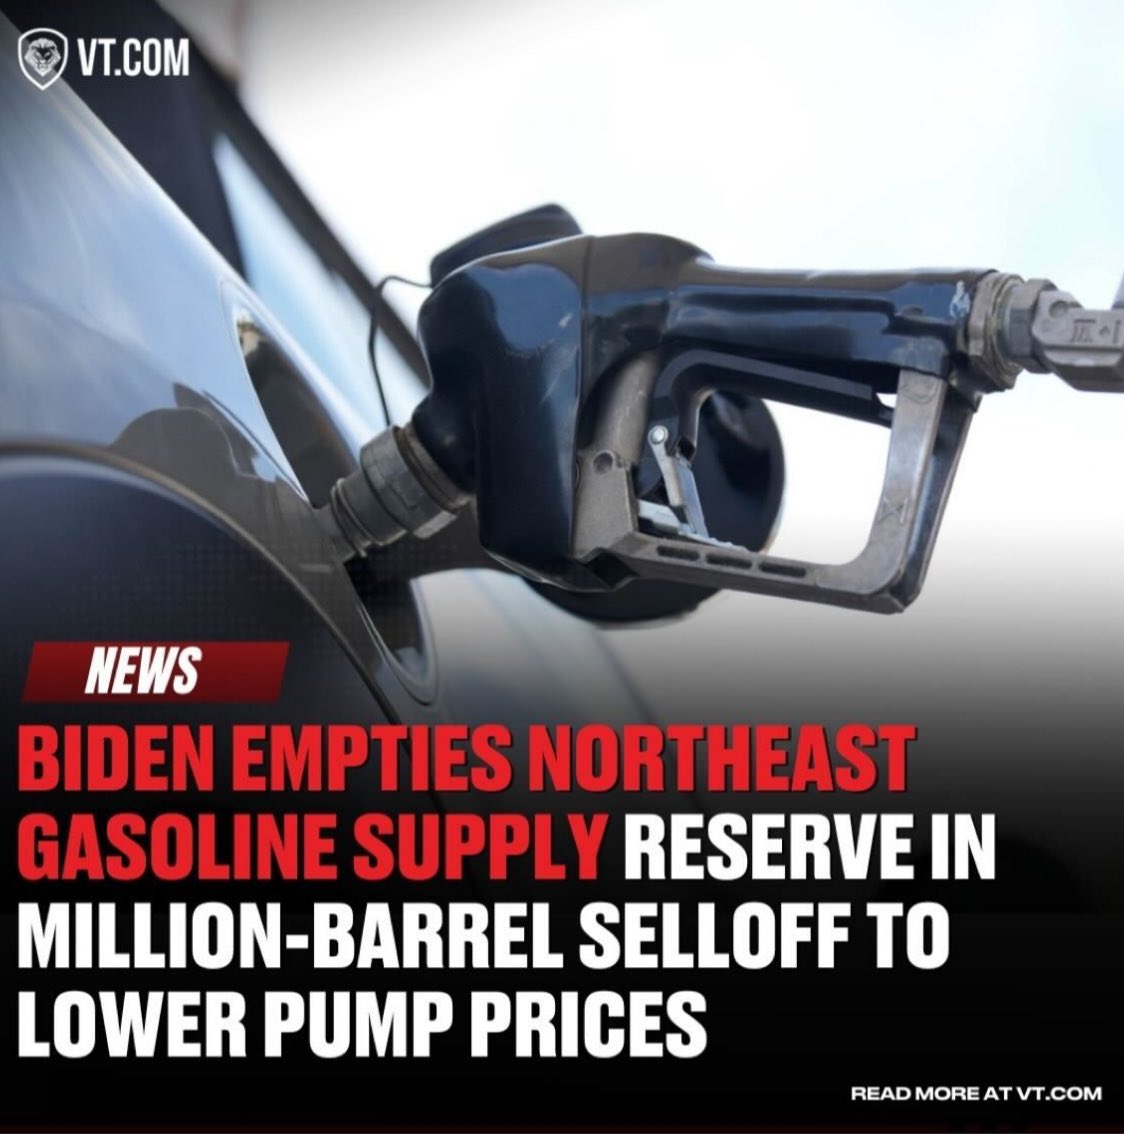 Budenomics actually works!!!! Biden empties northeast gasoline supply reserve in million barrel sell off to lower gas prices. Thank you @POTUS